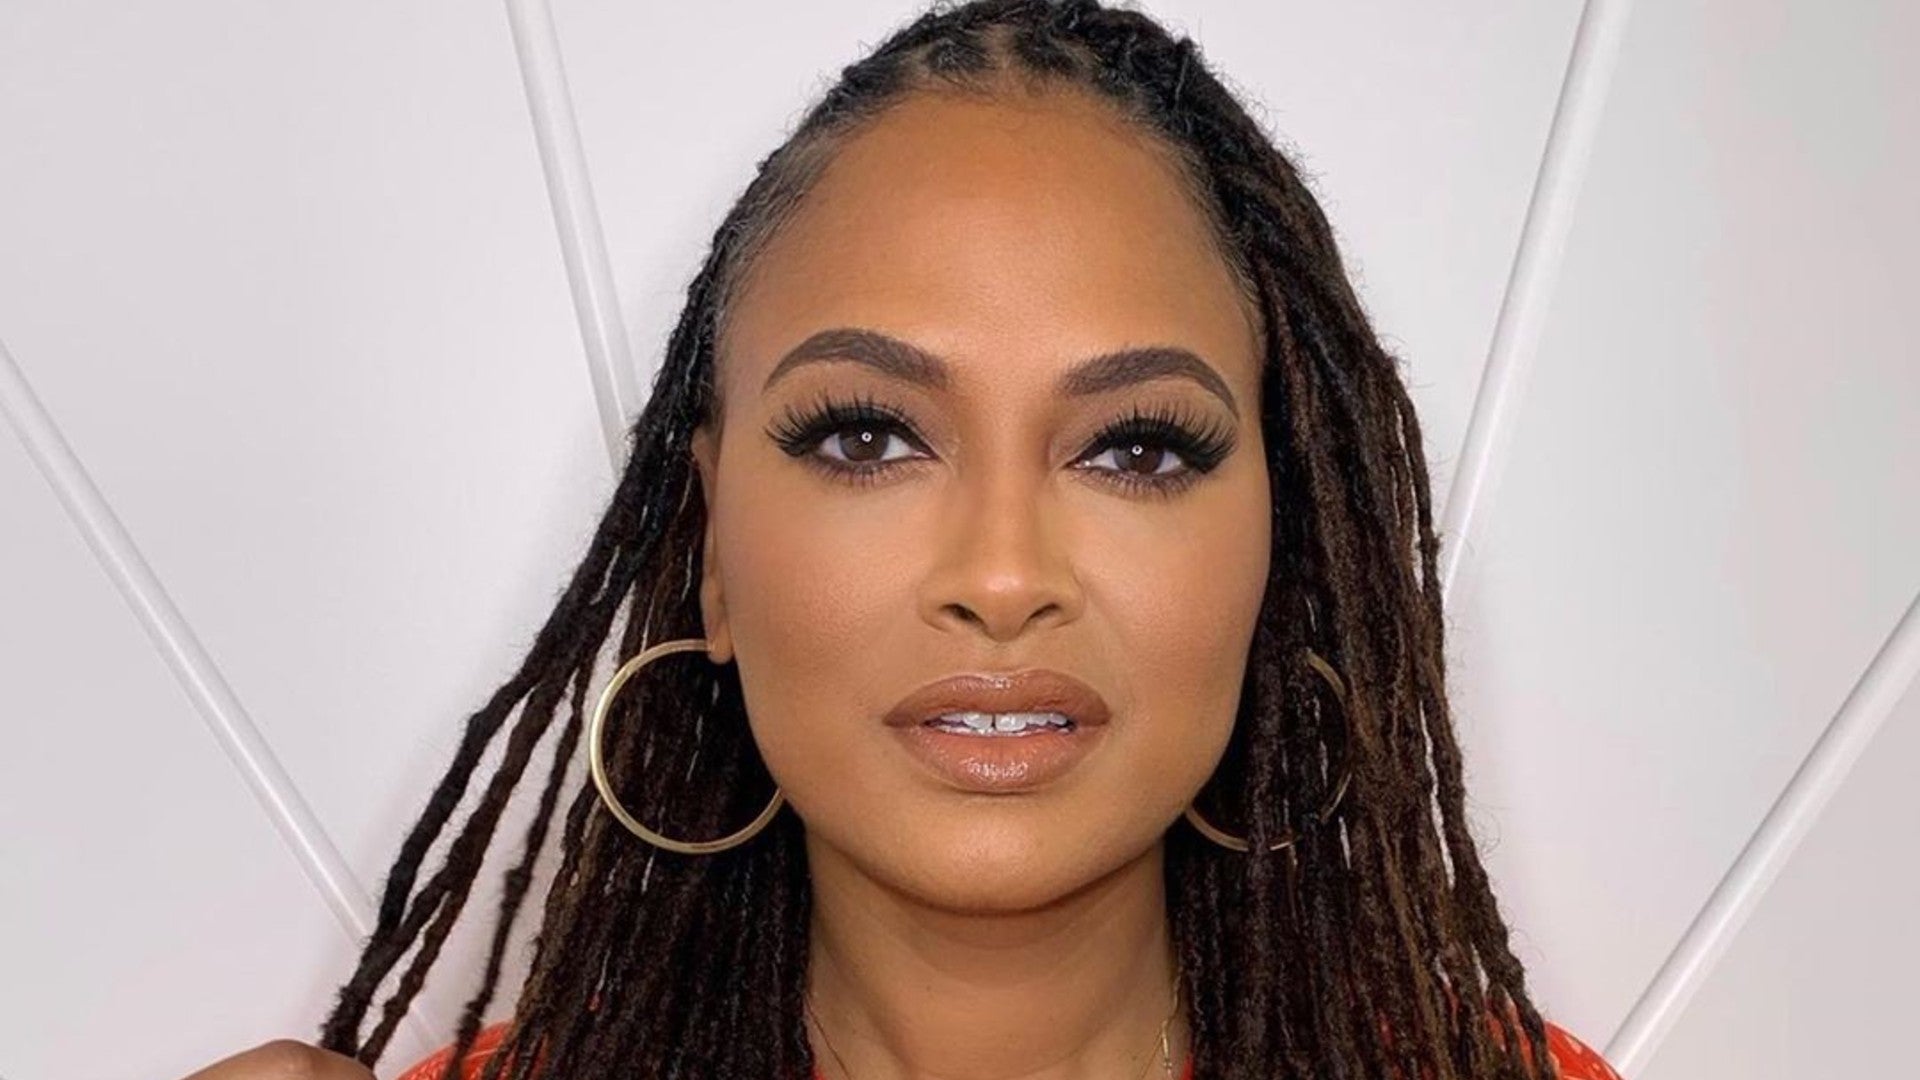 Ciara, Ava DuVernay, H.E.R. And Other Celebrity Beauty Looks Of The Week